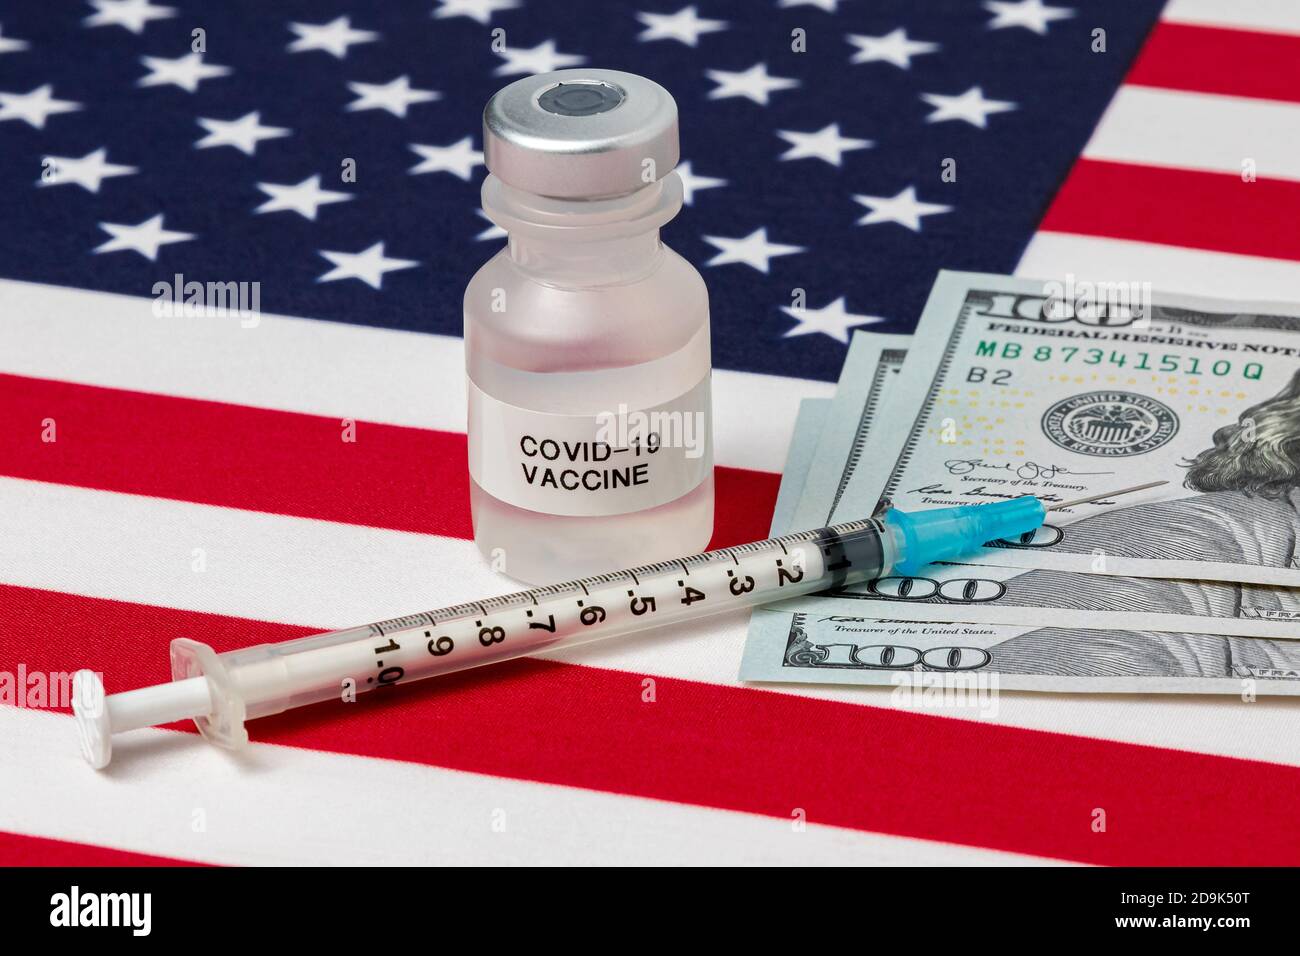 vial with Covid-19 vaccine, syringe, needle and 100 dollar bills on United States of America flag. Concept of medical research, coronavirus pandemic Stock Photo